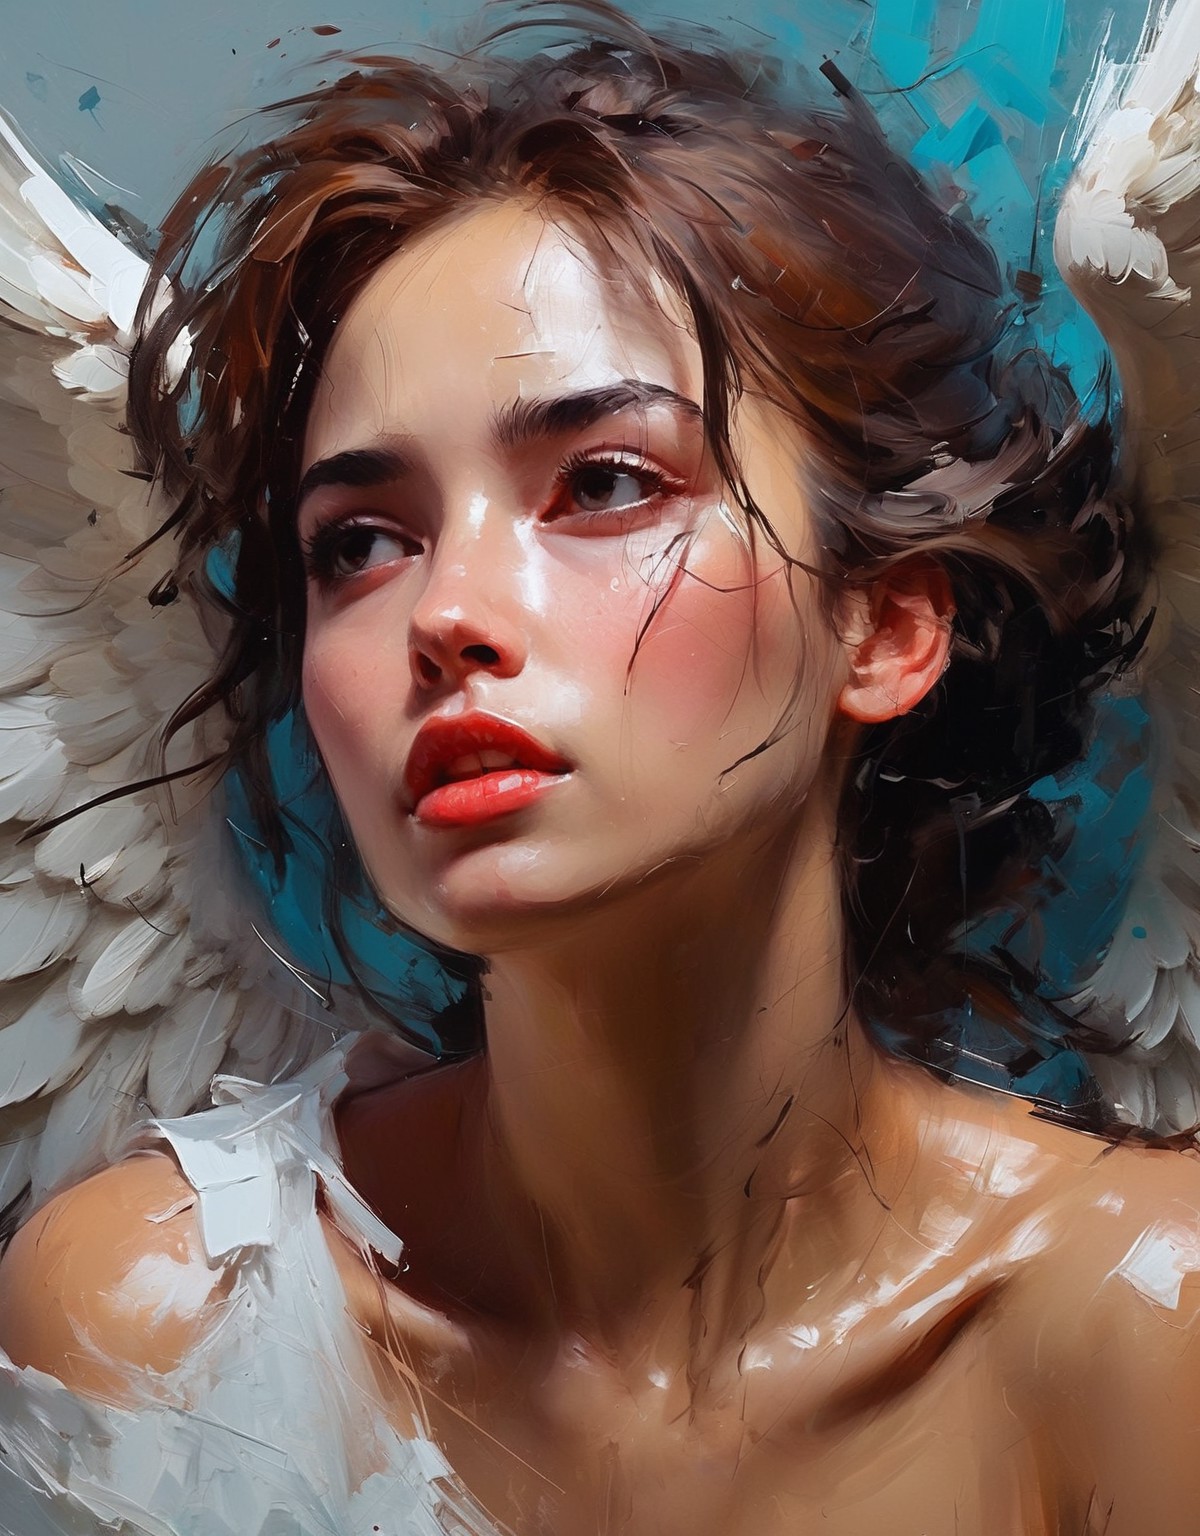 digital painting, expressive, bold brushstrokes, close-up woman as an angel style of Henry Asencio